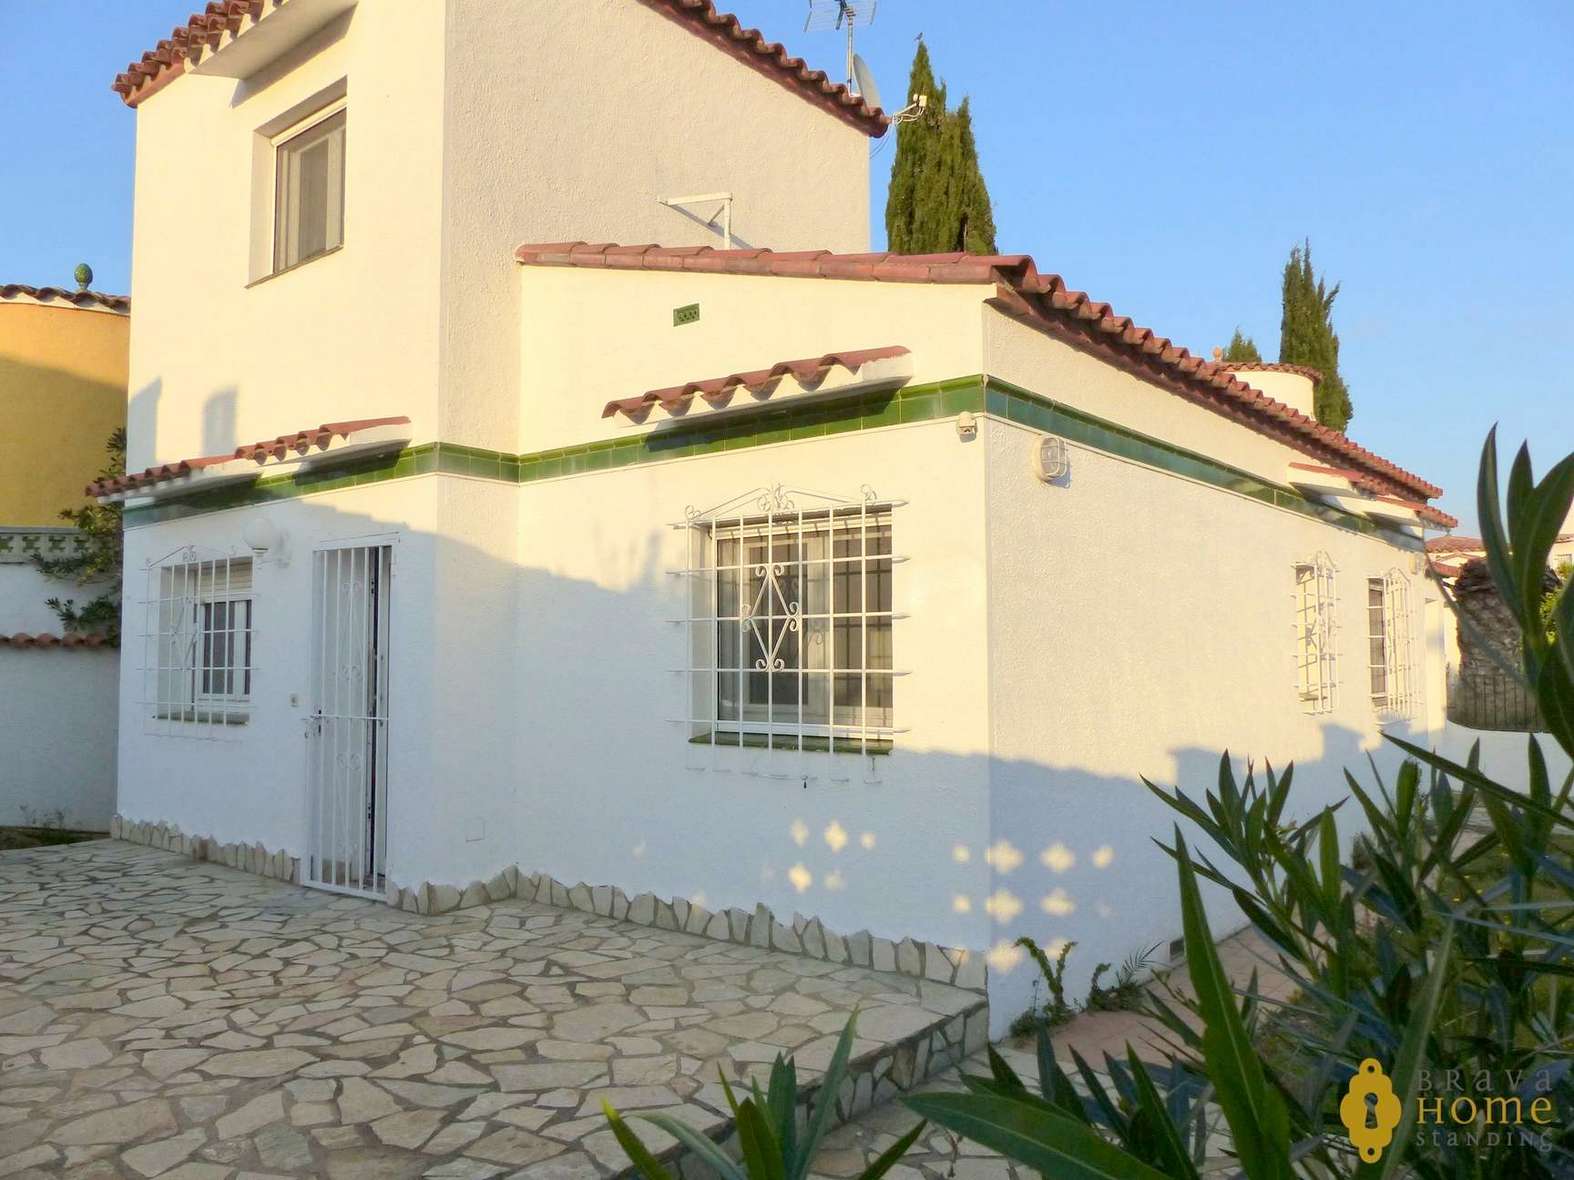 Nice 3 bedroom house for sale in Empuriabrava with large garage